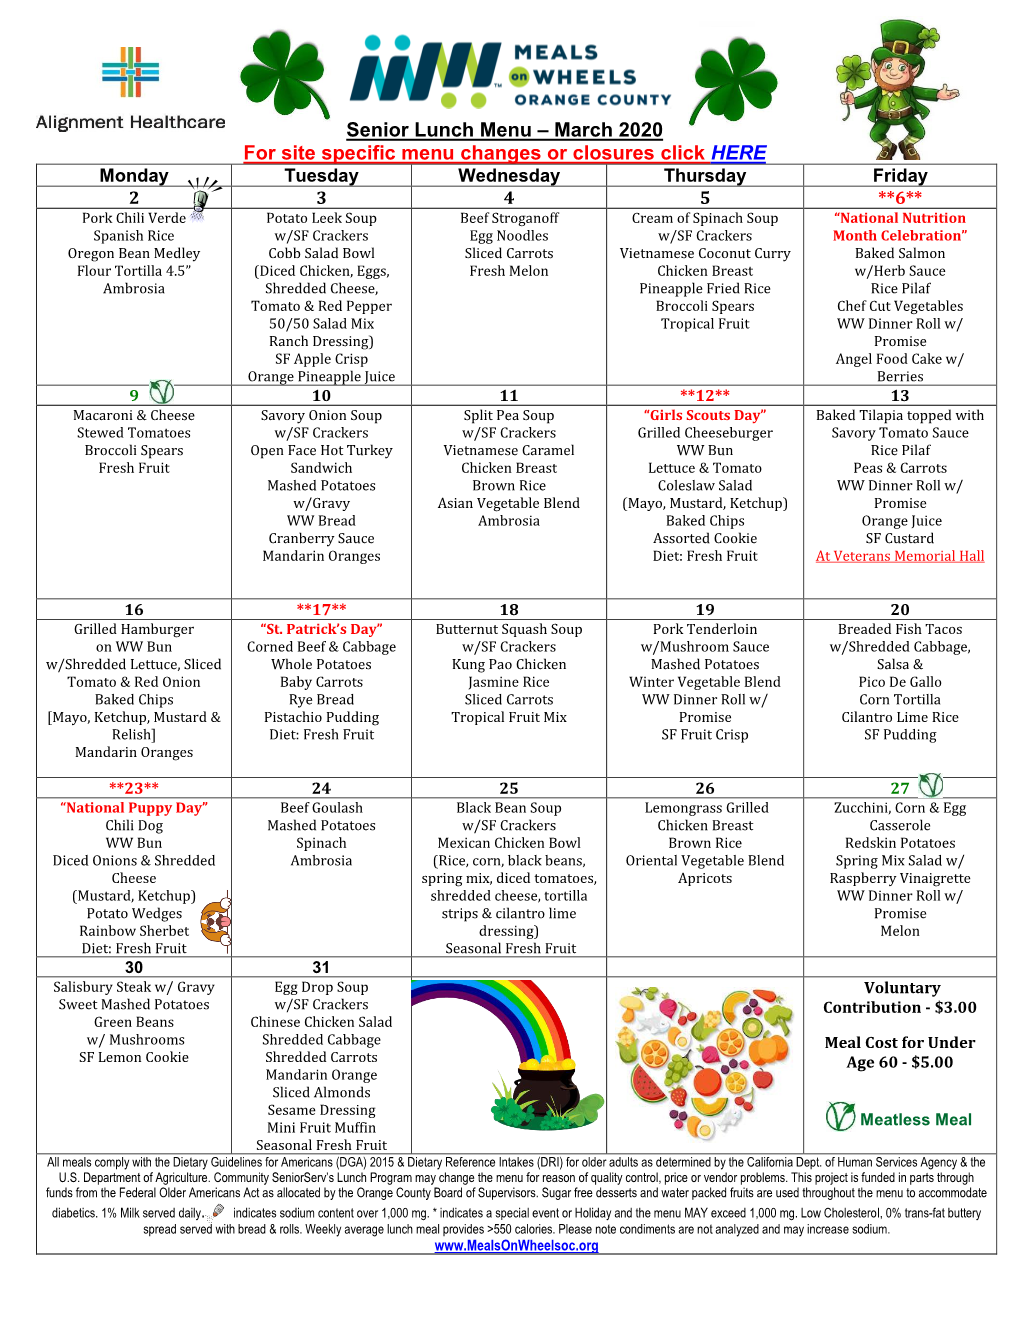 Senior Lunch Menu – March 2020 for Site Specific Menu Changes Or